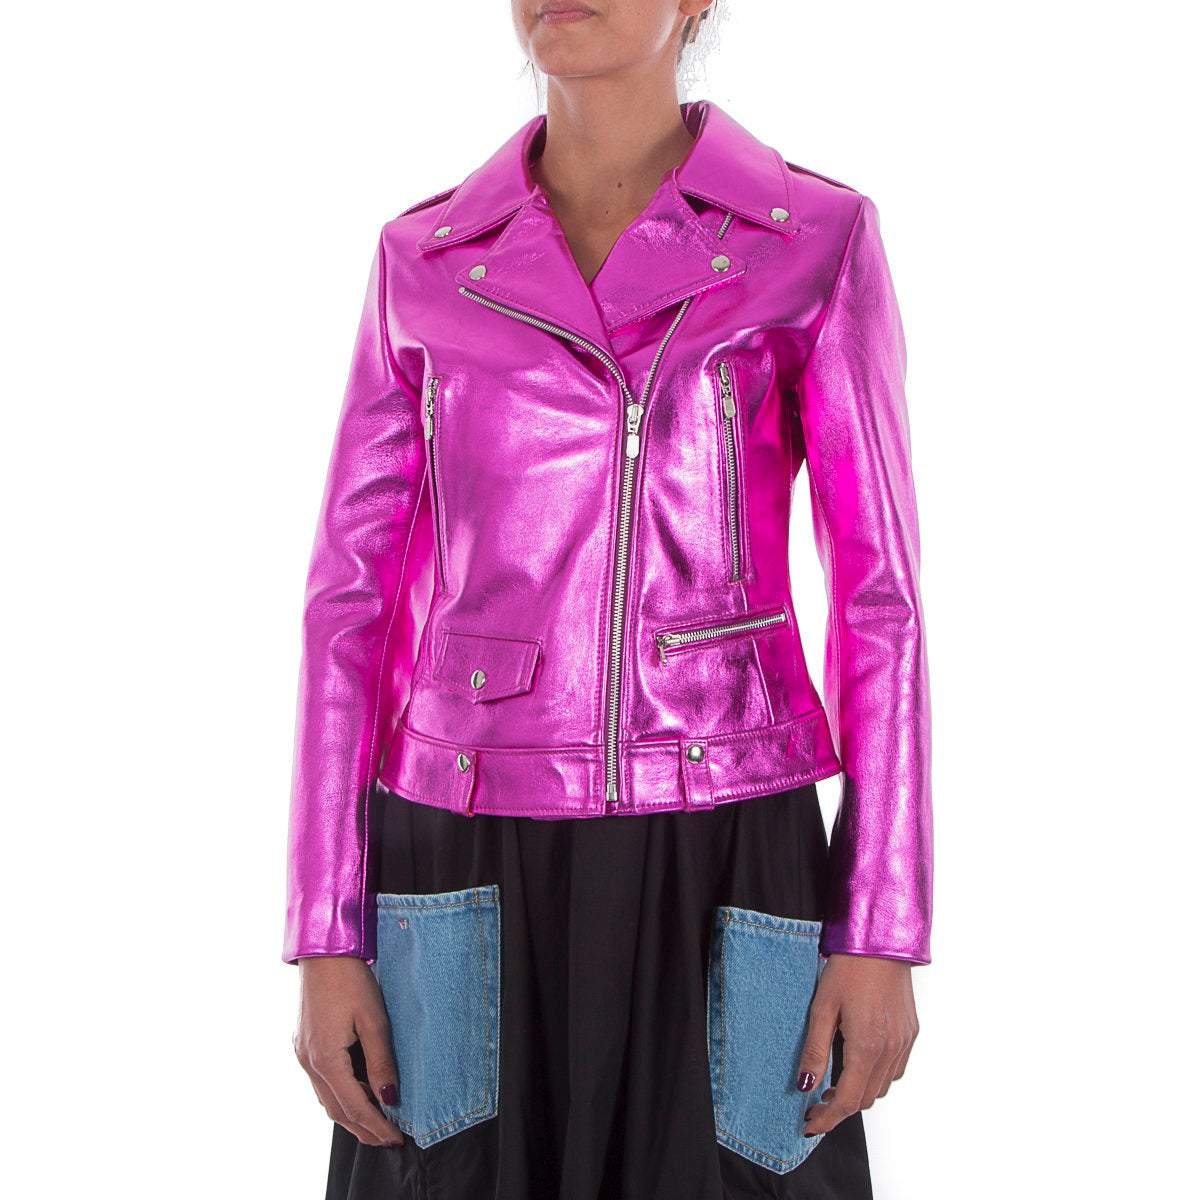 Women's Motorcycle Slim Fit Pink Jacket Pink Women's Motorcycle Jacket  Racing jacket Leather jacket Slim Fit Hot Pink (as1, alpha, s, regular,  regular, Small) at Amazon Women's Coats Shop